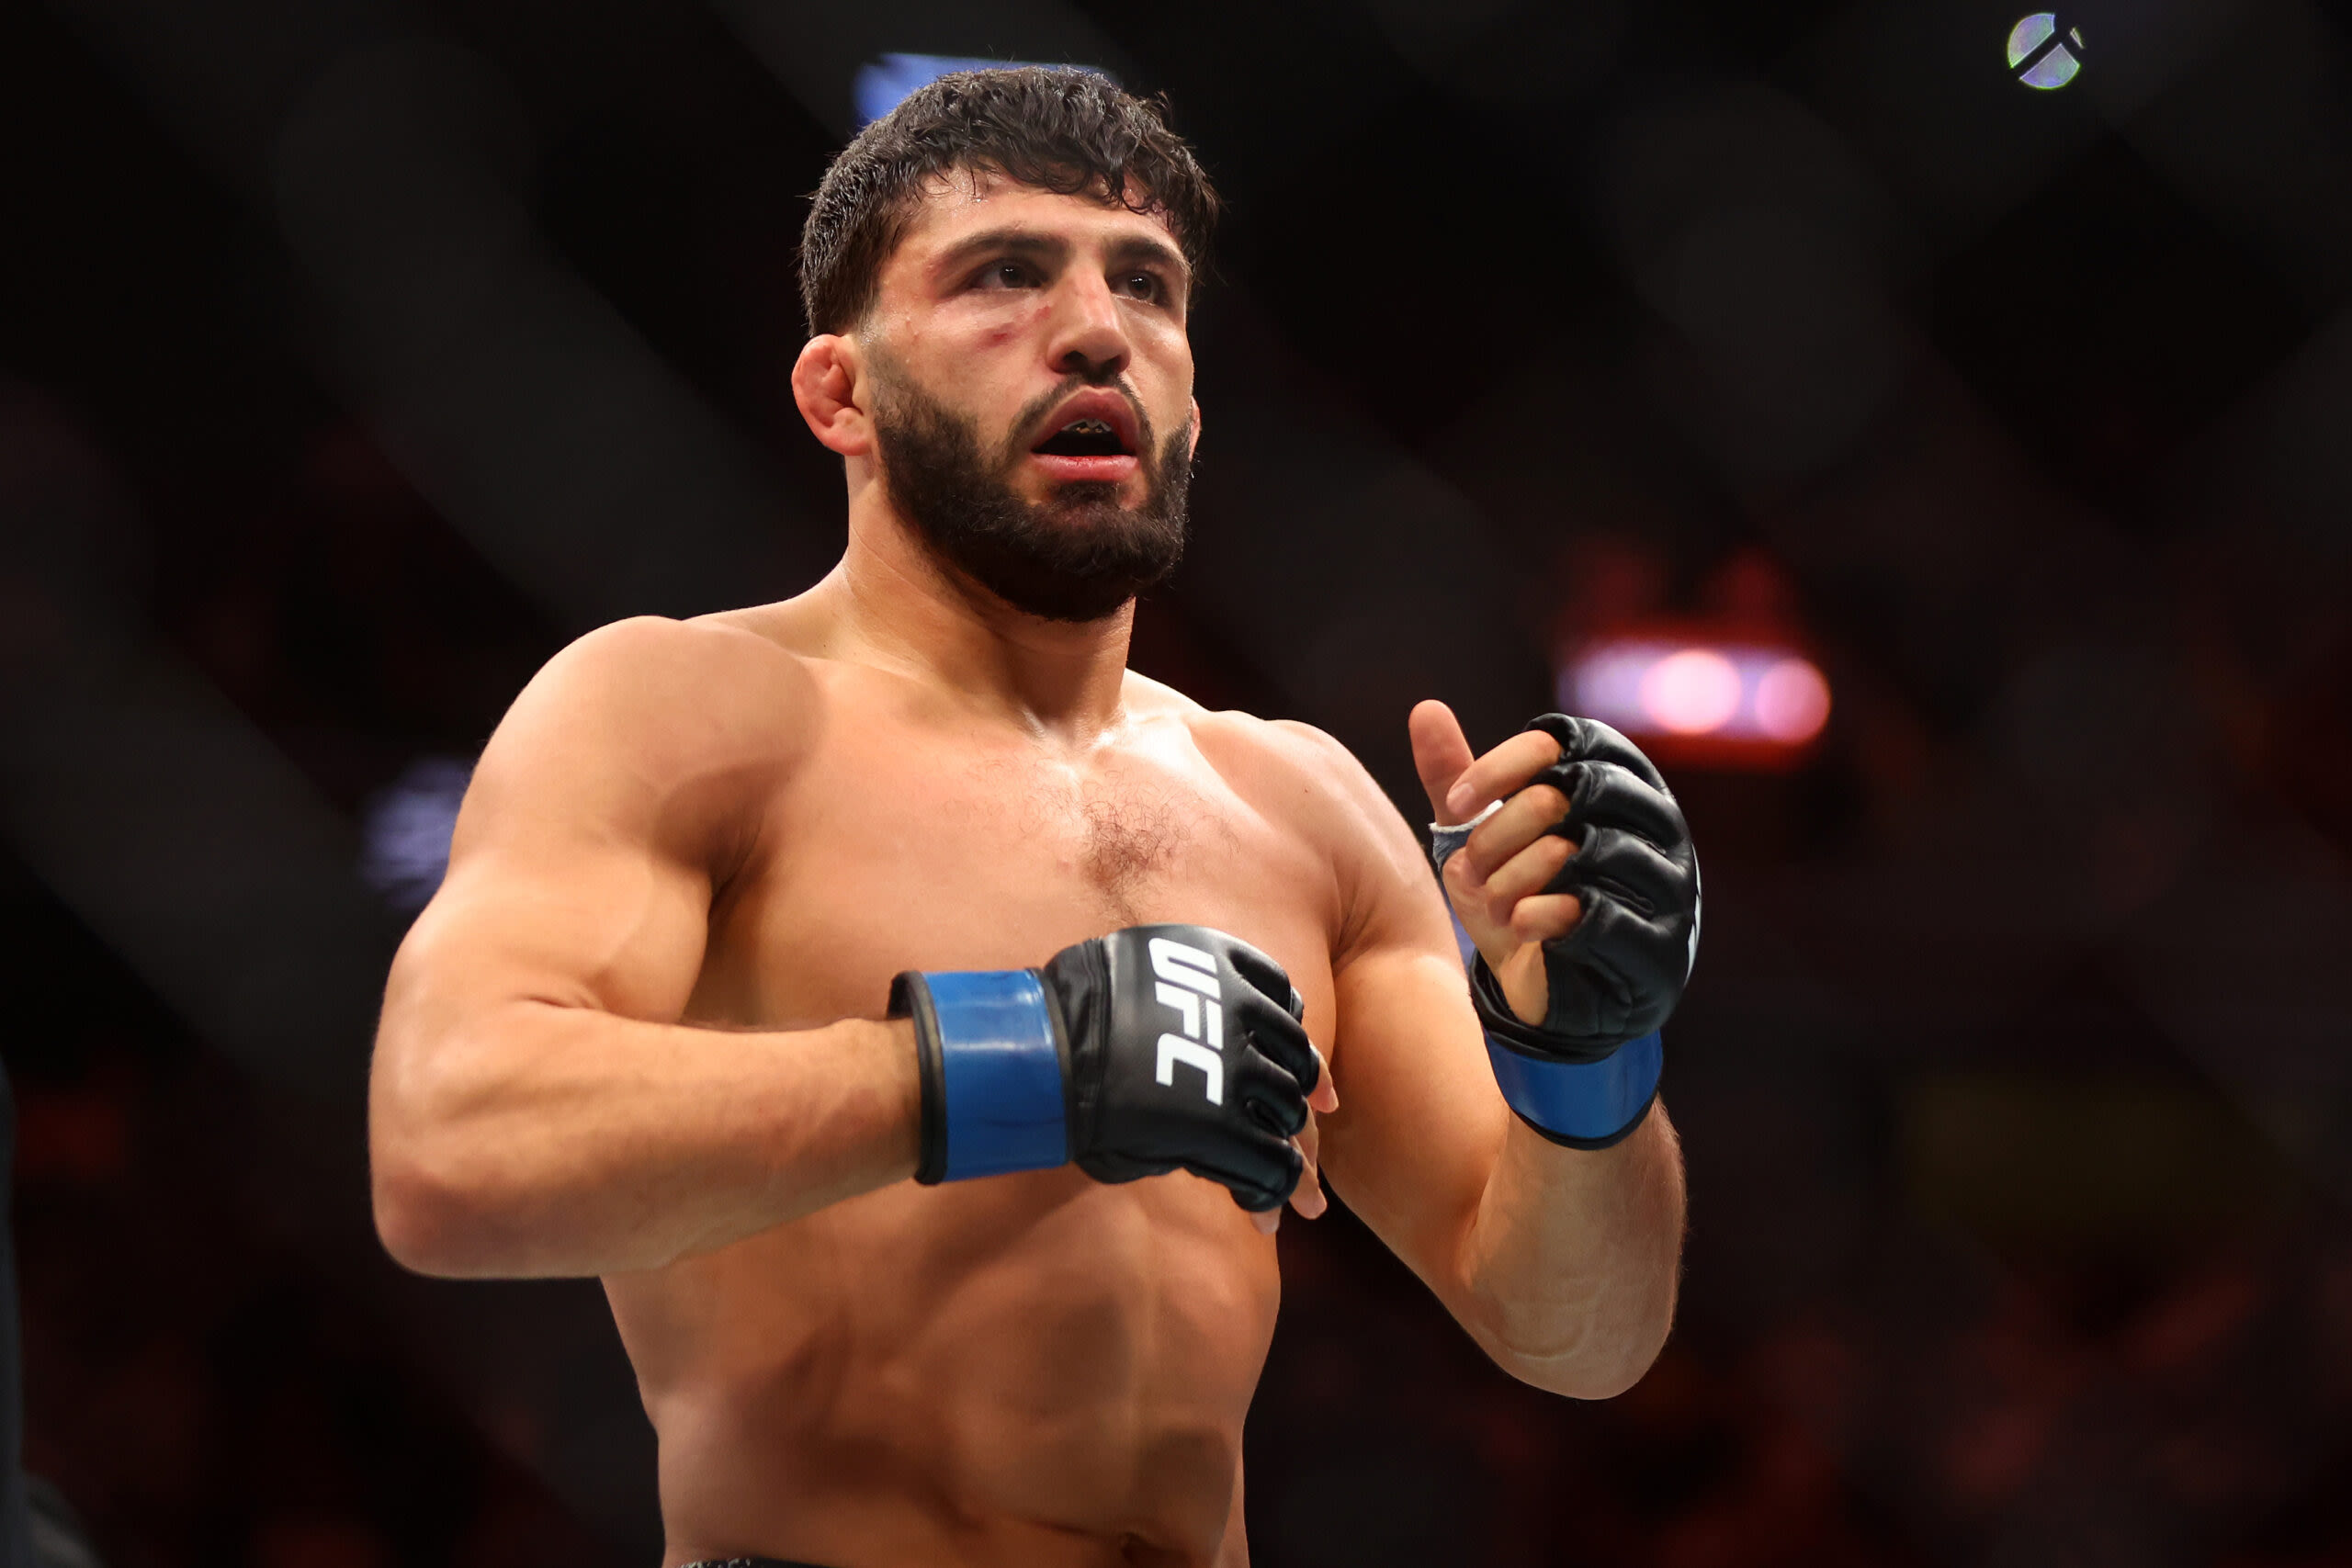 Islam Makhachev’s coach: Arman Tsarukyan passing up title shot ‘right call from him’